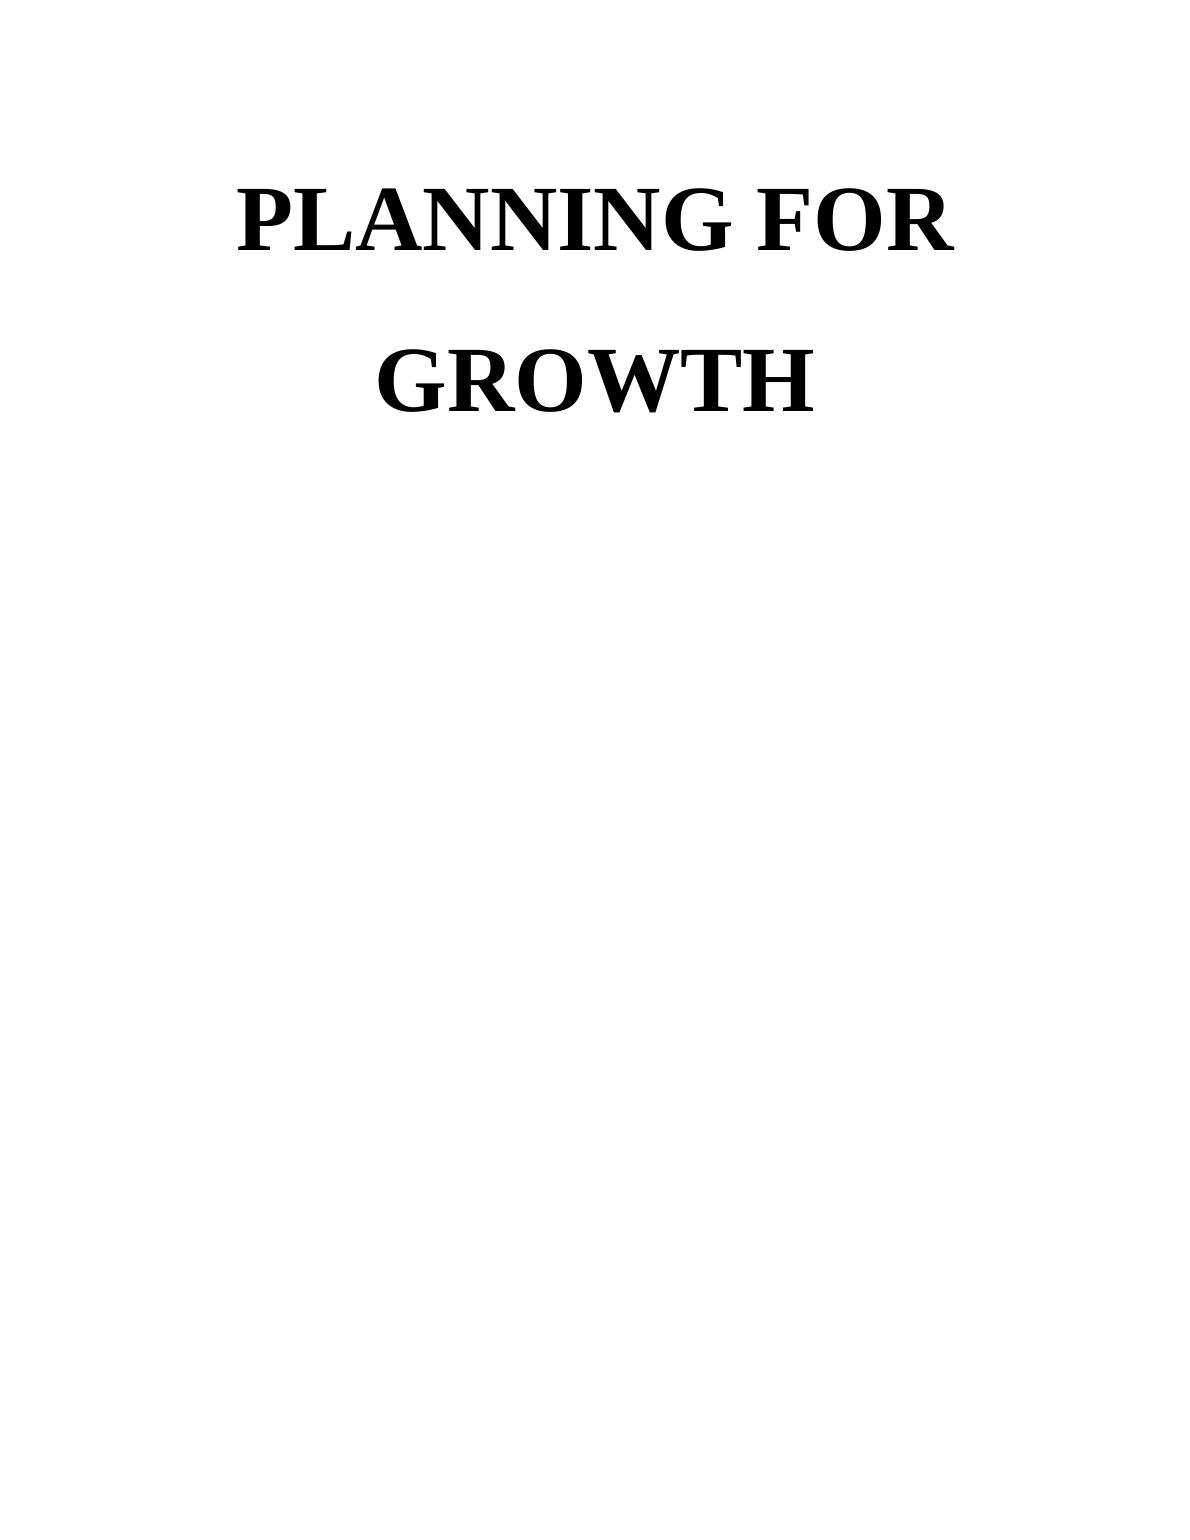 Planning for Growth TABLE OF CONTENTS INTRODUCTION 1 LO 1 1 P1. Analysing the important considerations_1